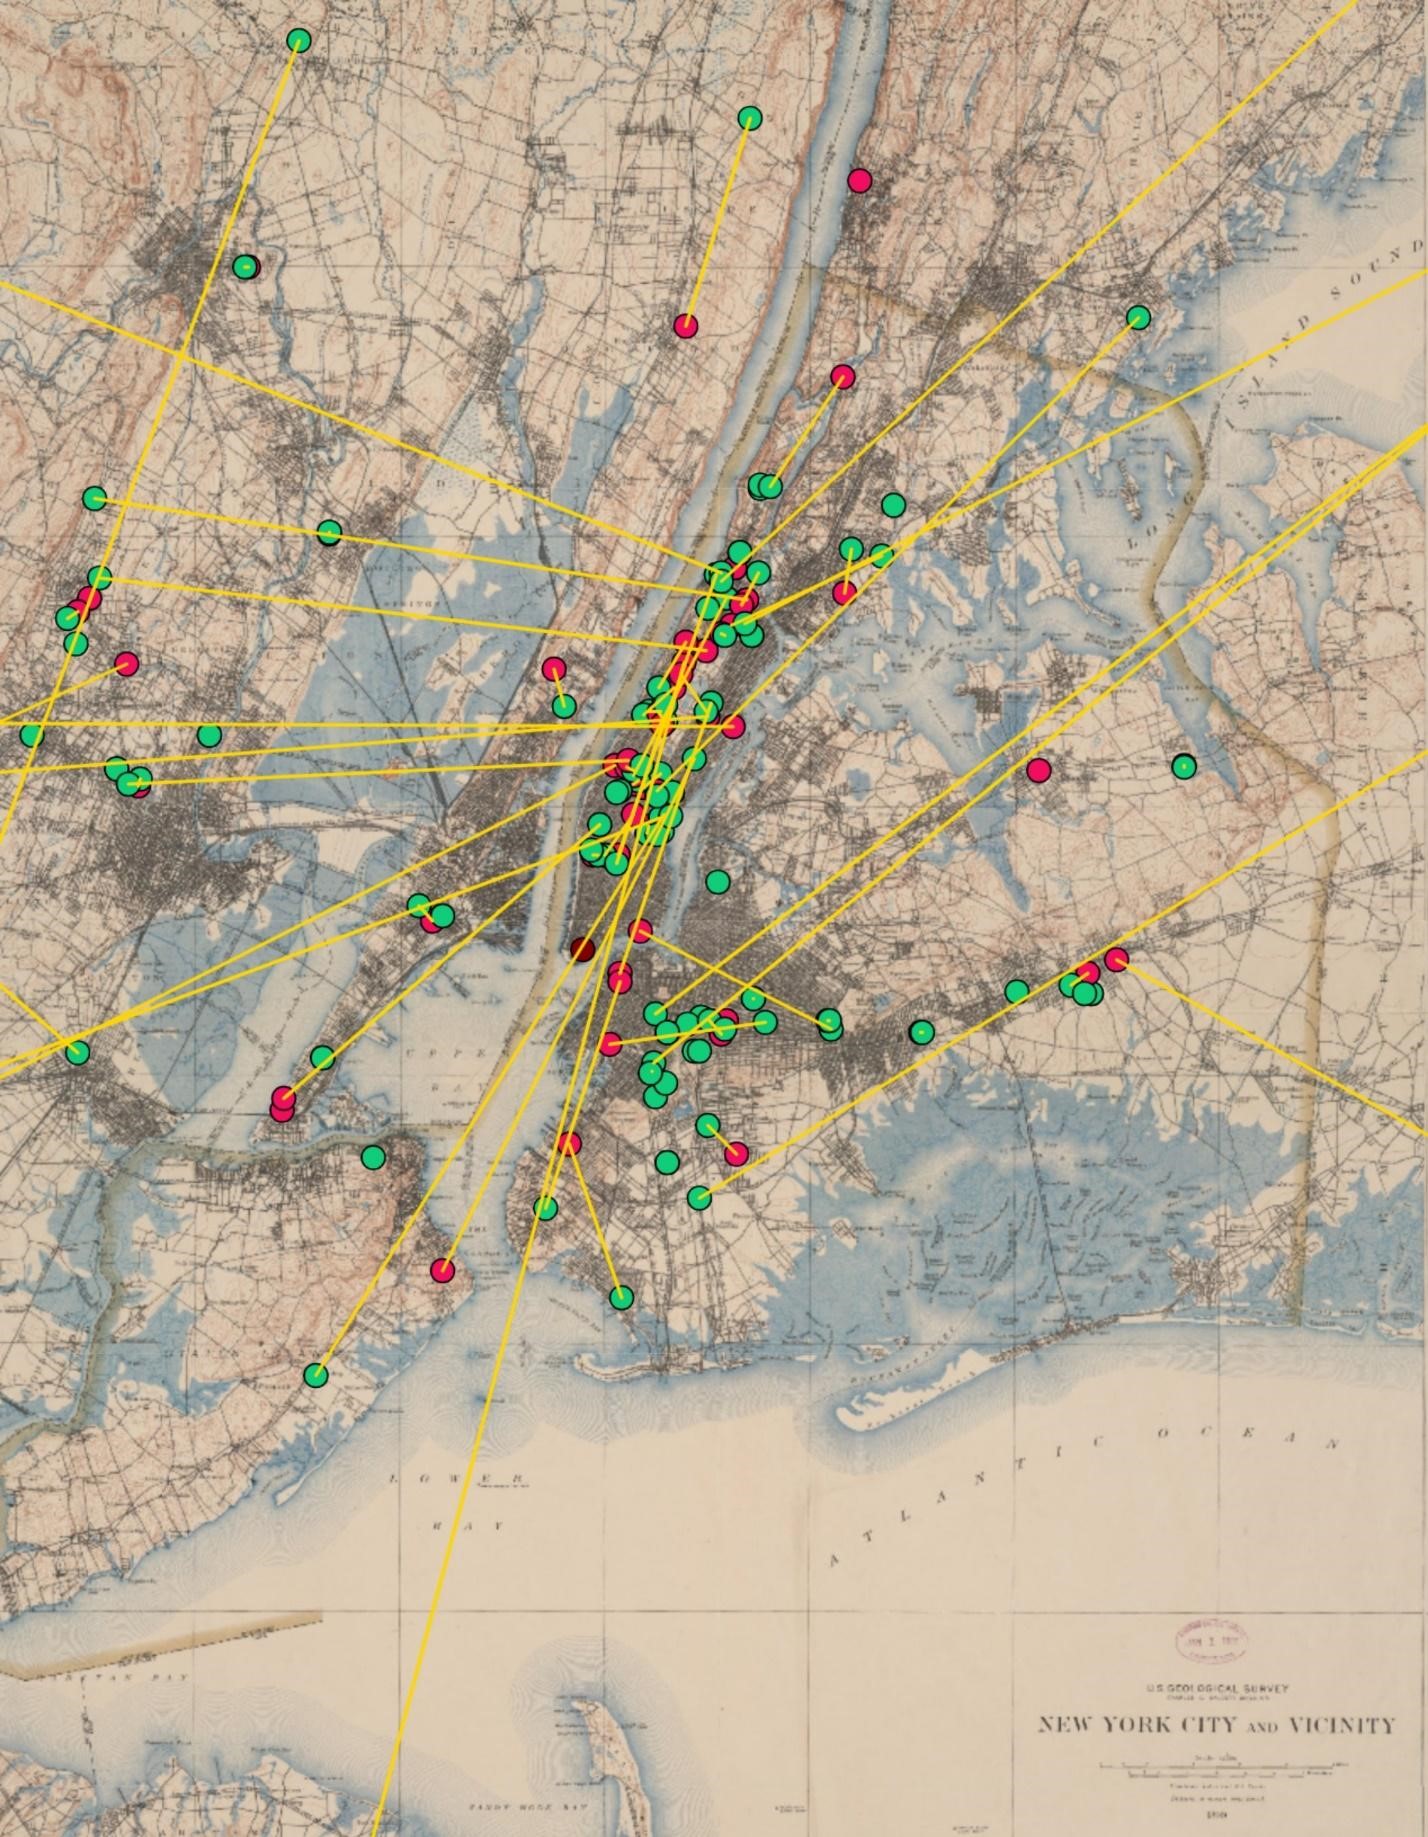 A map of New York City, showing the location of workers in the years nineteen hundred and nineteen hundred and ten